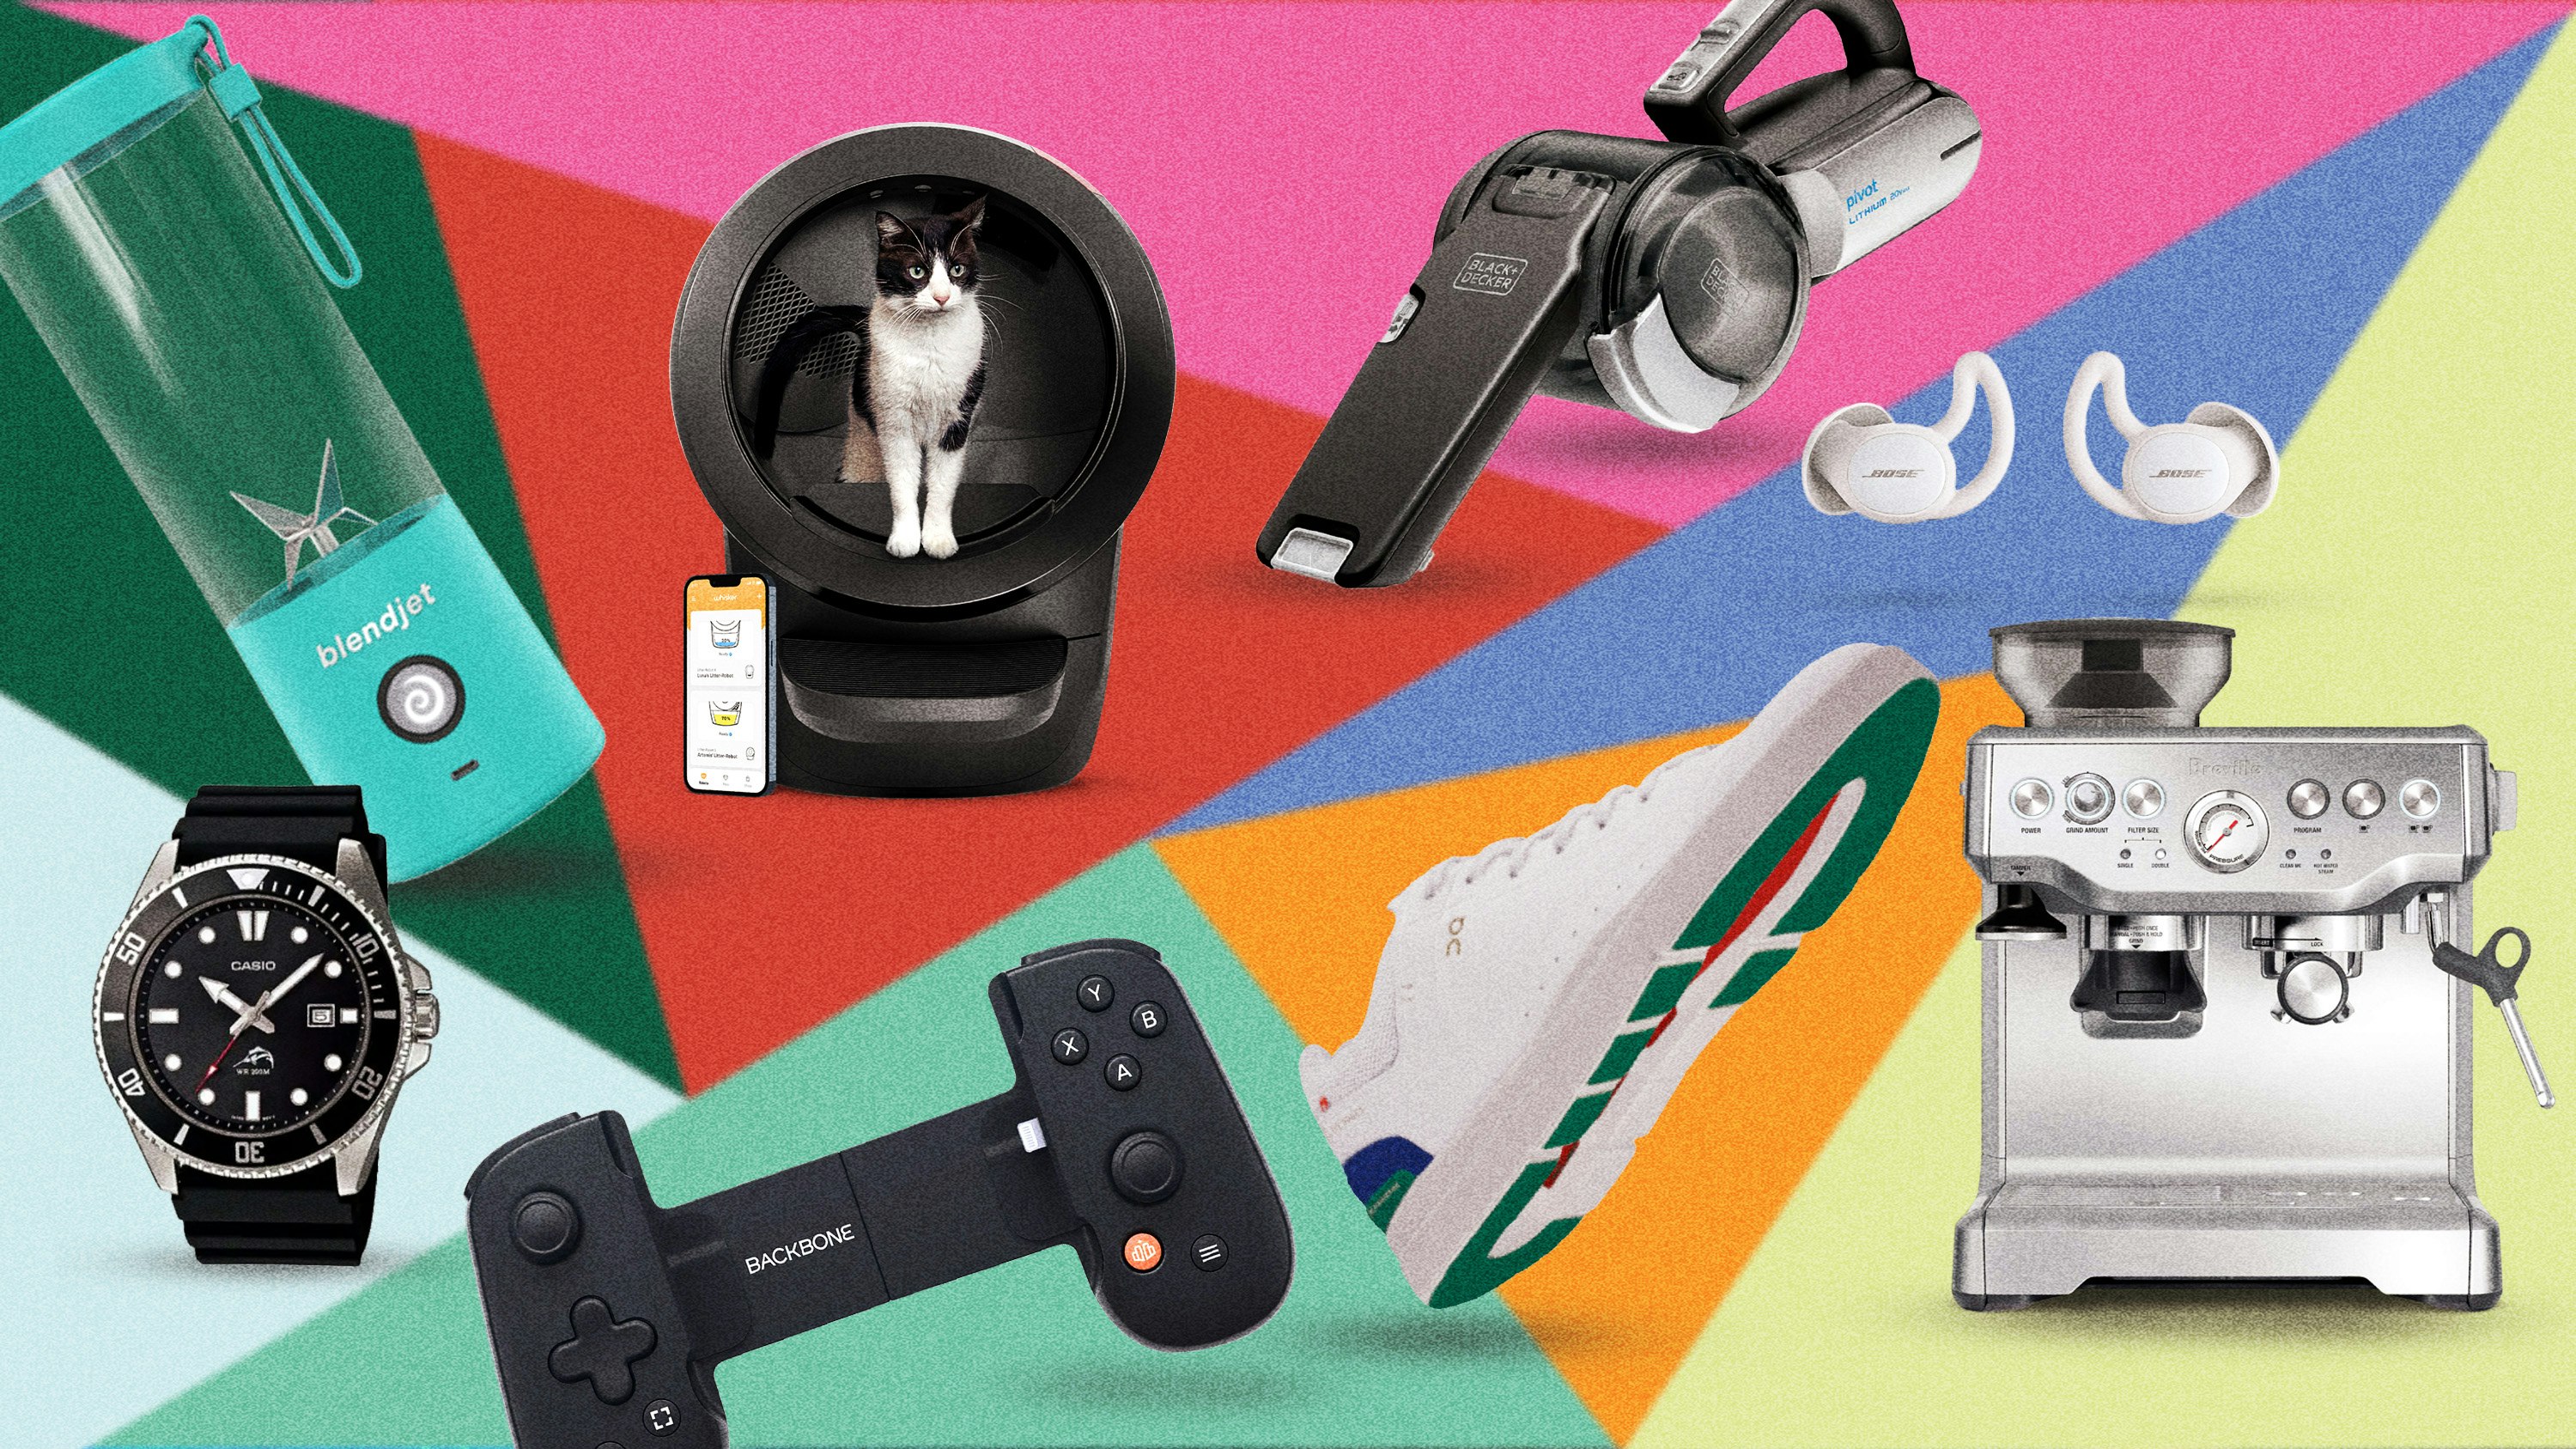 20 Tech Deals Under $200 That You Can Still Score In Time For December 25 |  PCMag